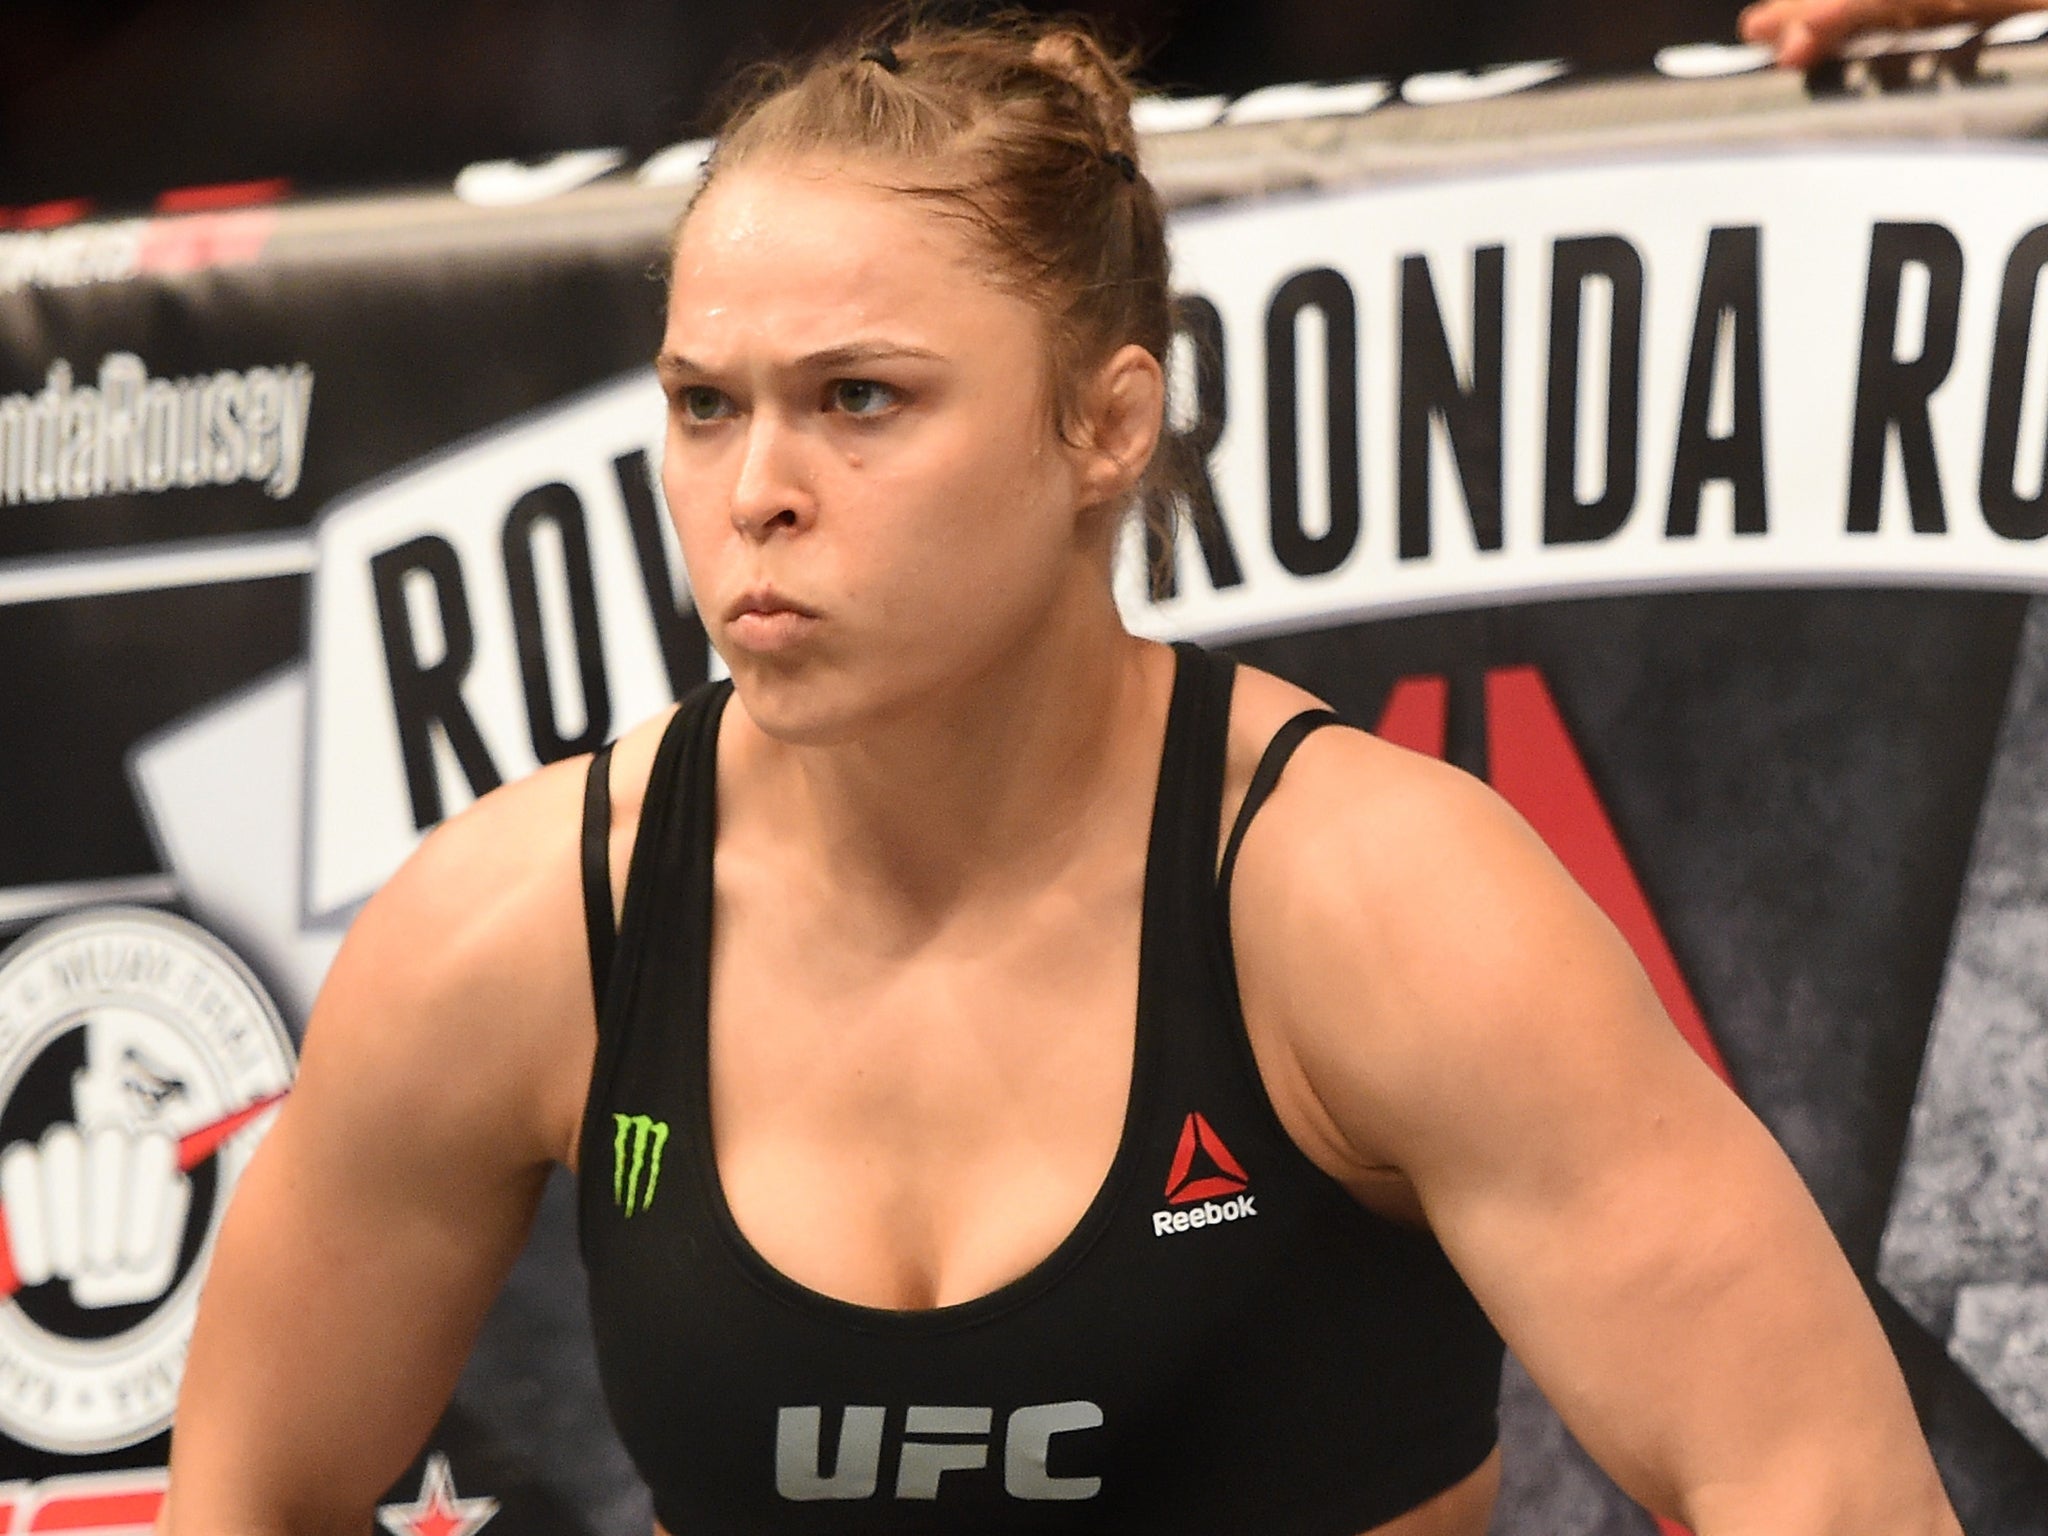 Rousey has never lost in the UFC